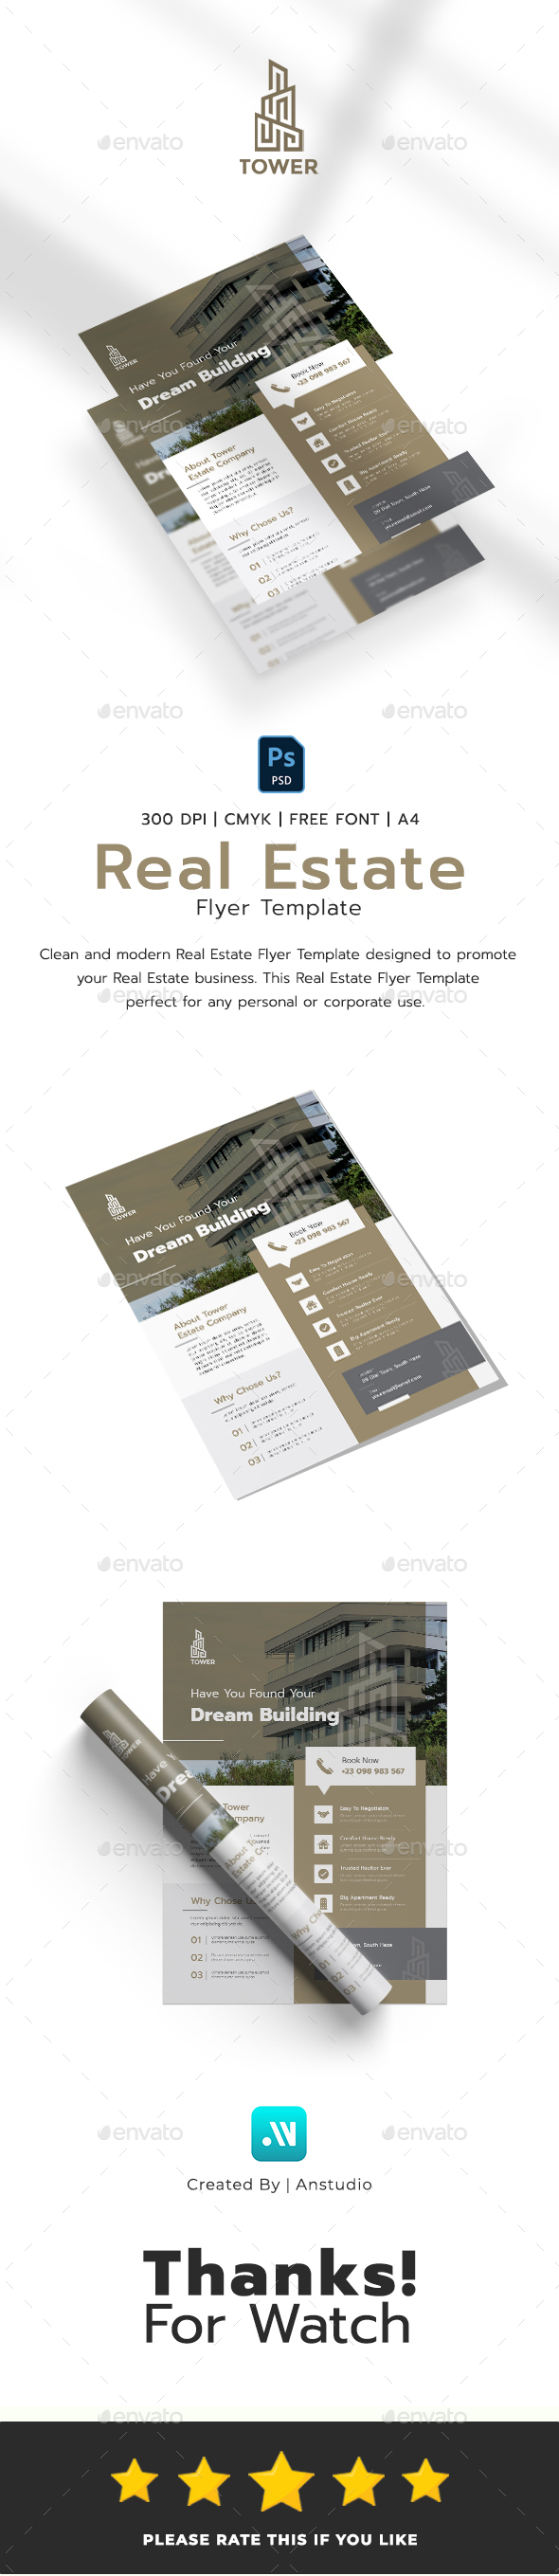 [DOWNLOAD]Tower Real Estate Flyer Template